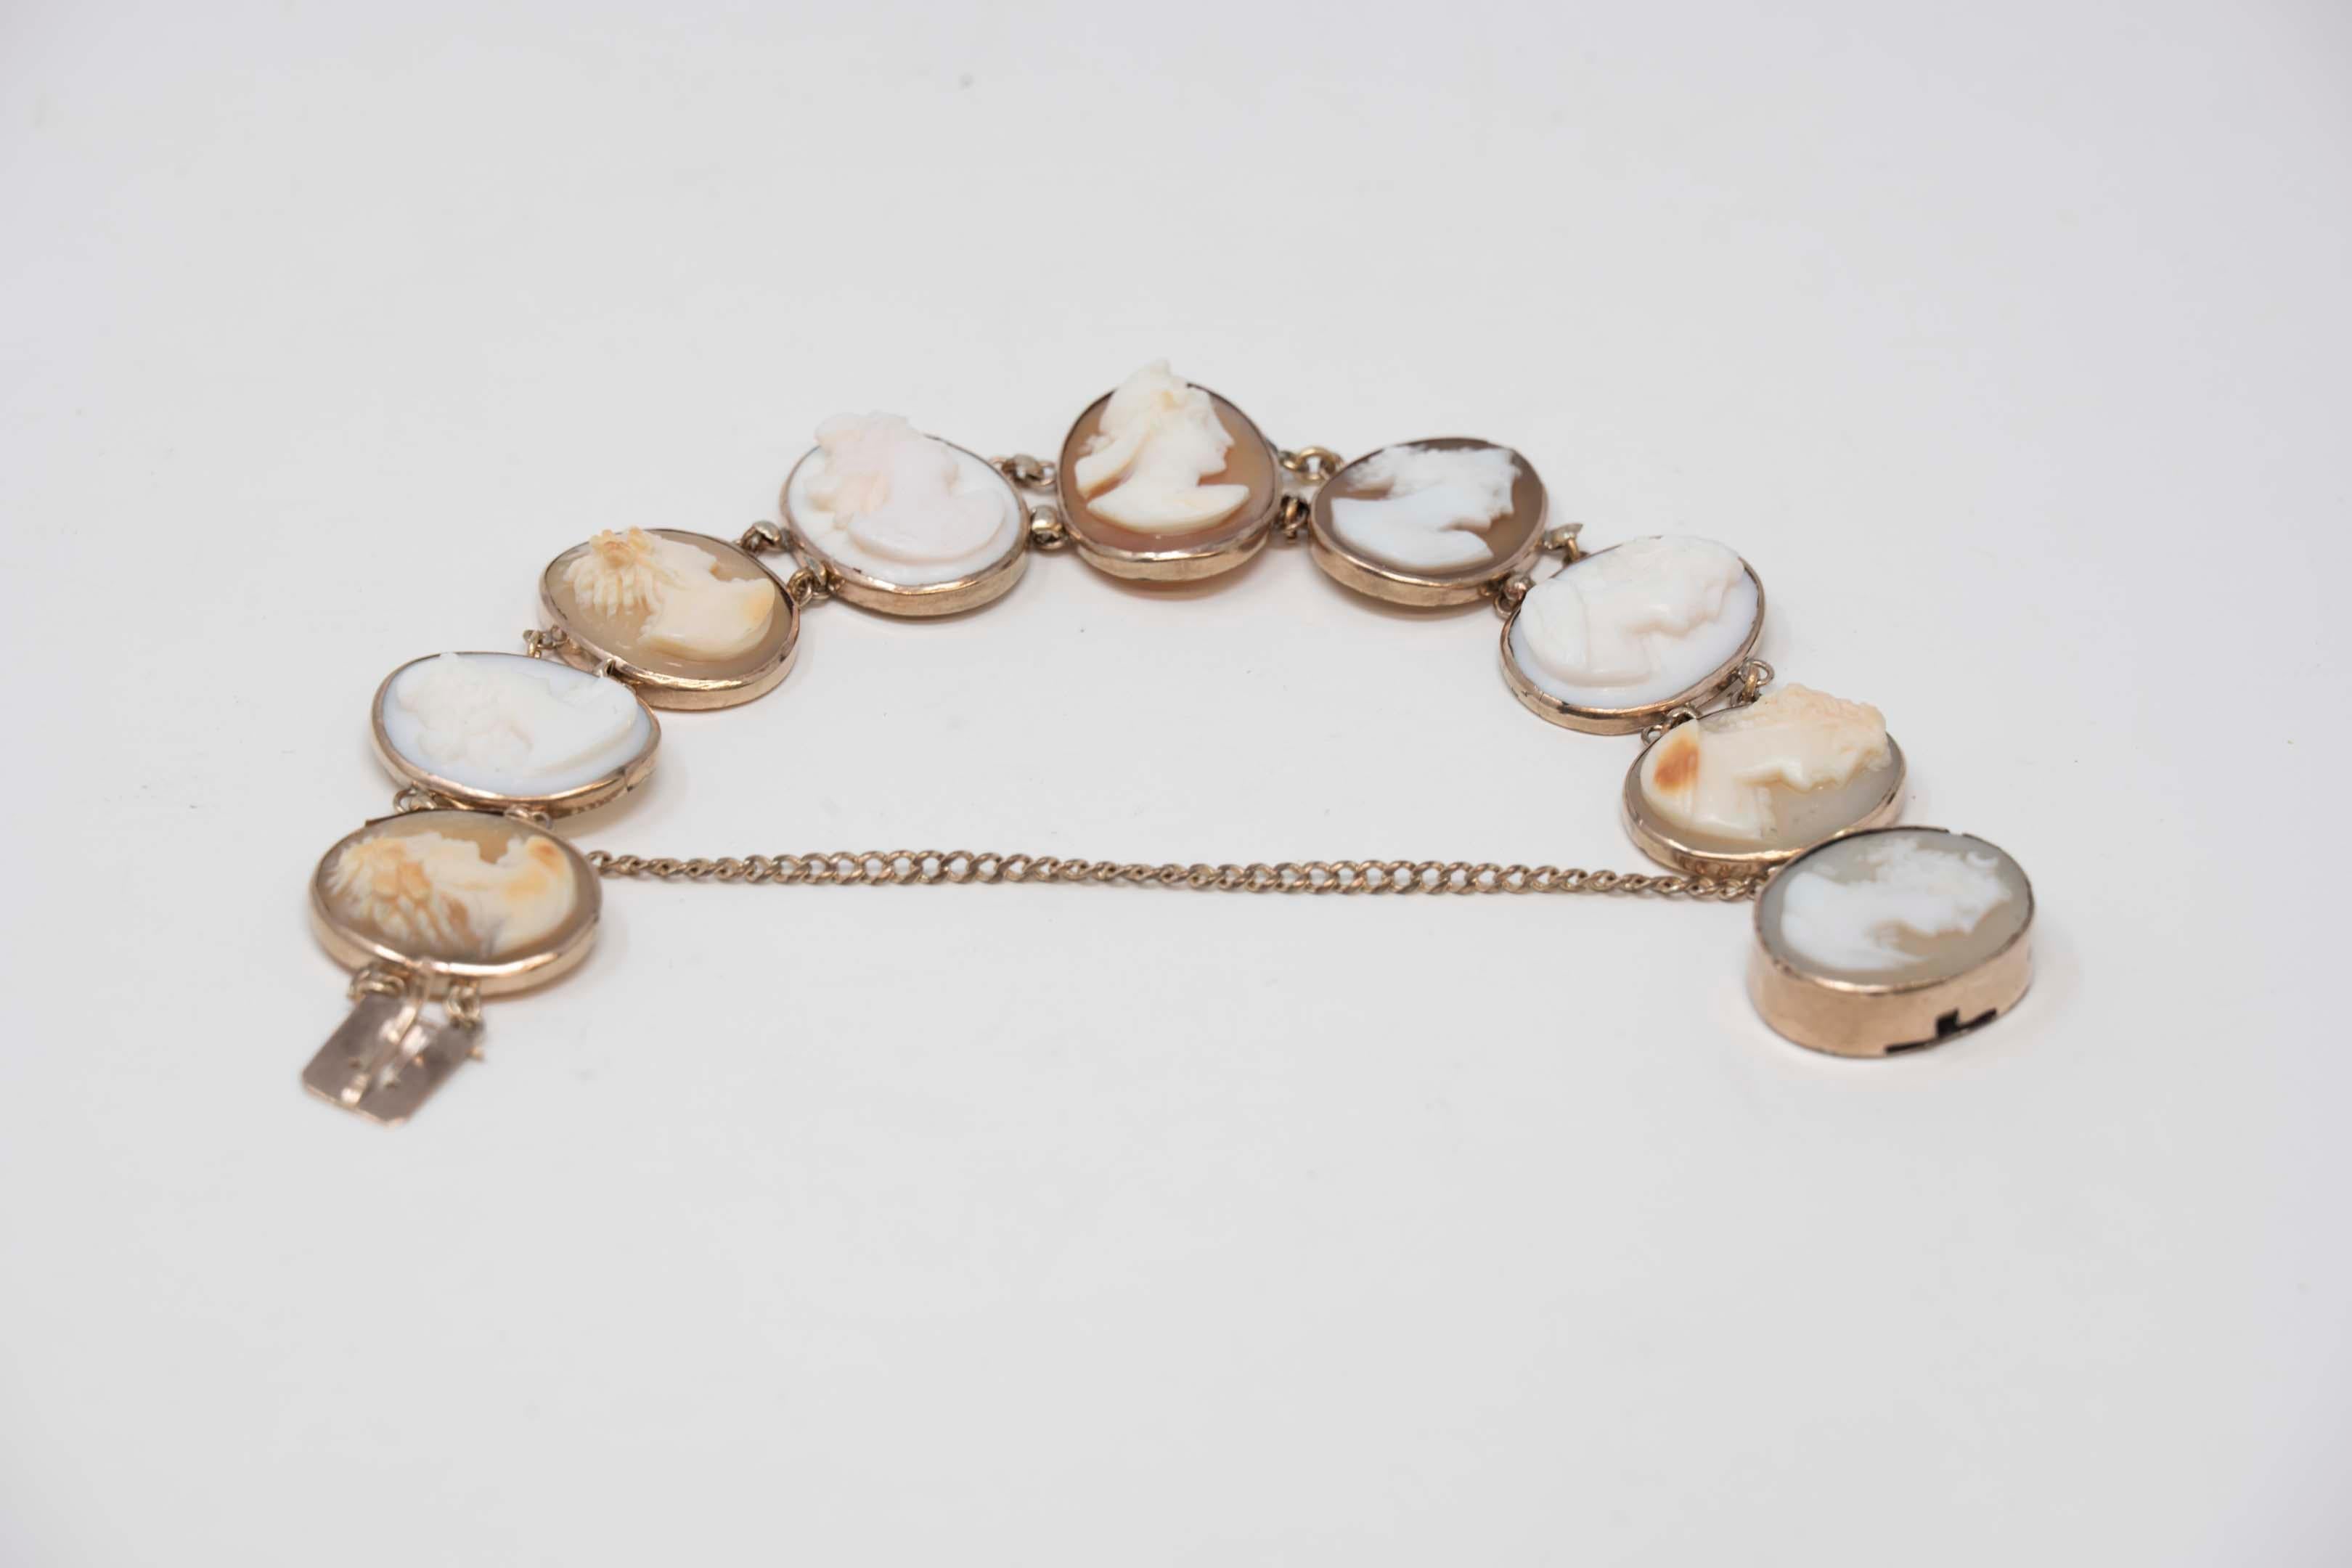 Antique 10k gold conch shell cameo bracelet circa 1890, unmarked, tested 10k gold. Measures 6 1/2 inches long, each carved figure measures 17mm x 13mm. The wear is consistent with age 14.8 grams.
